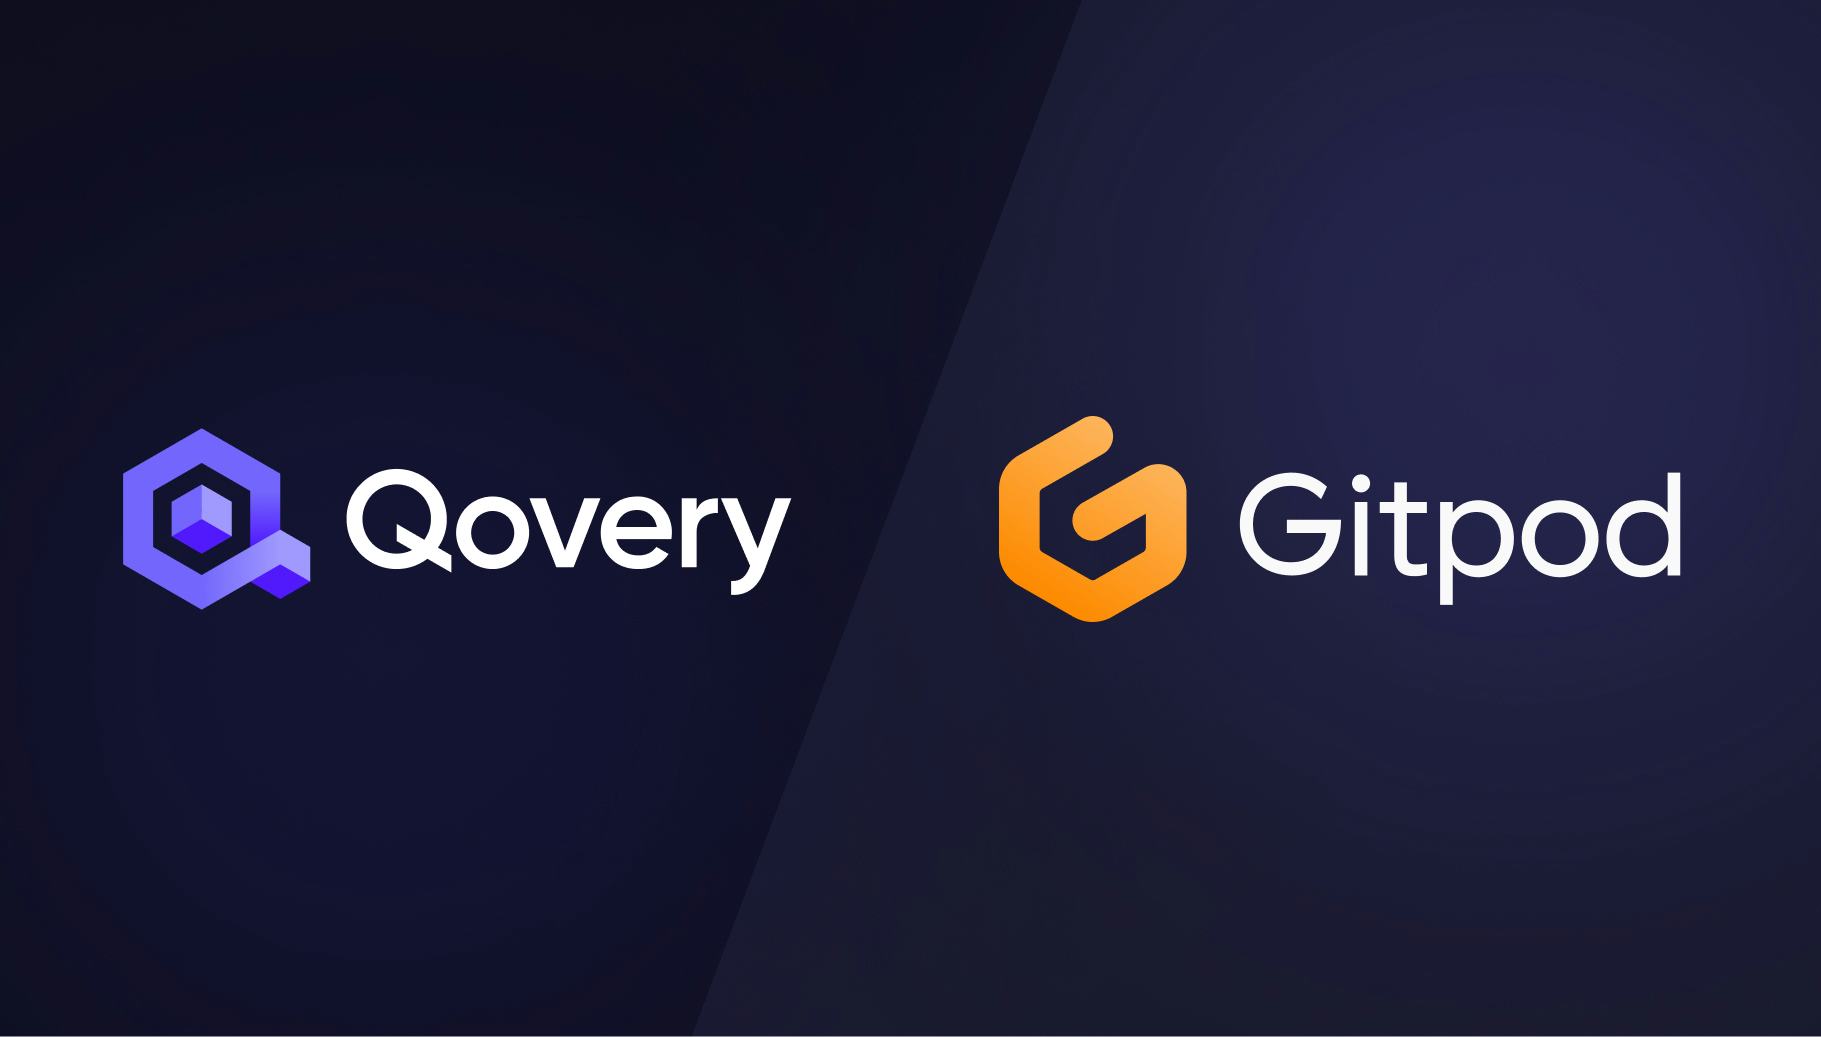 Qovery x Gitpod - Develop, Deploy and Run applications on AWS with Gitpod and Qovery